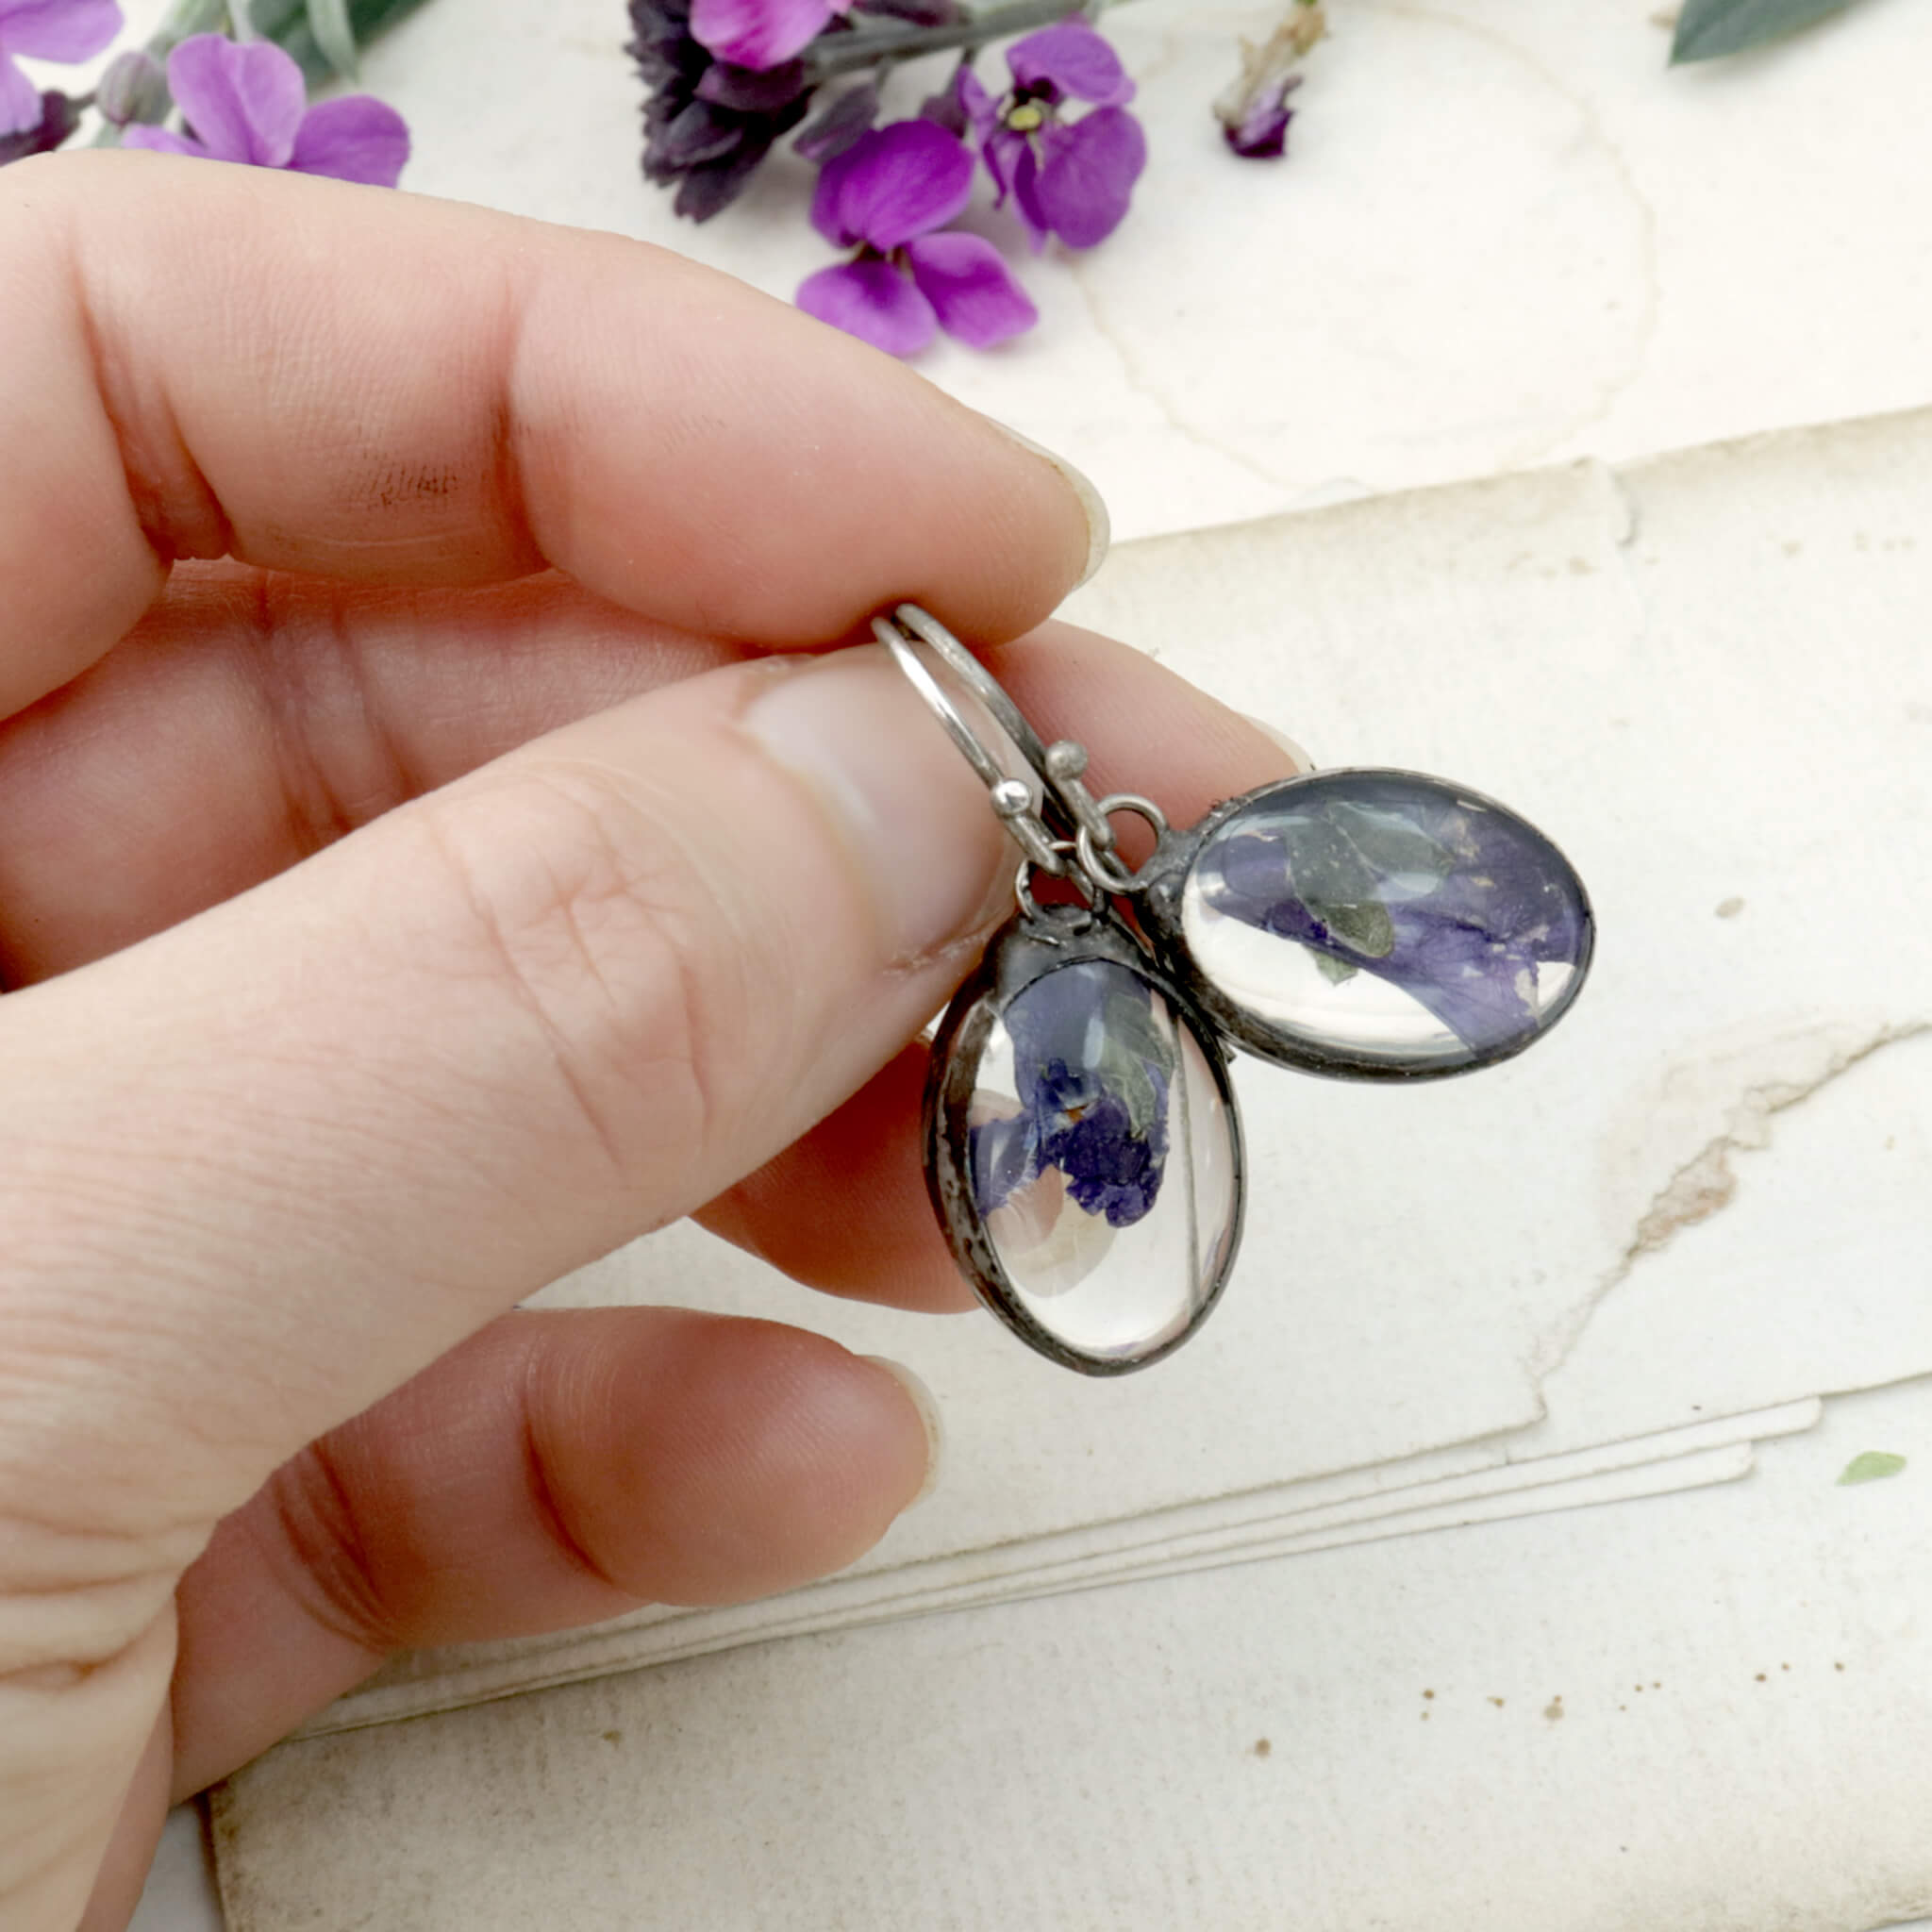 Earrings with real sweet violet flowers being hold in hand